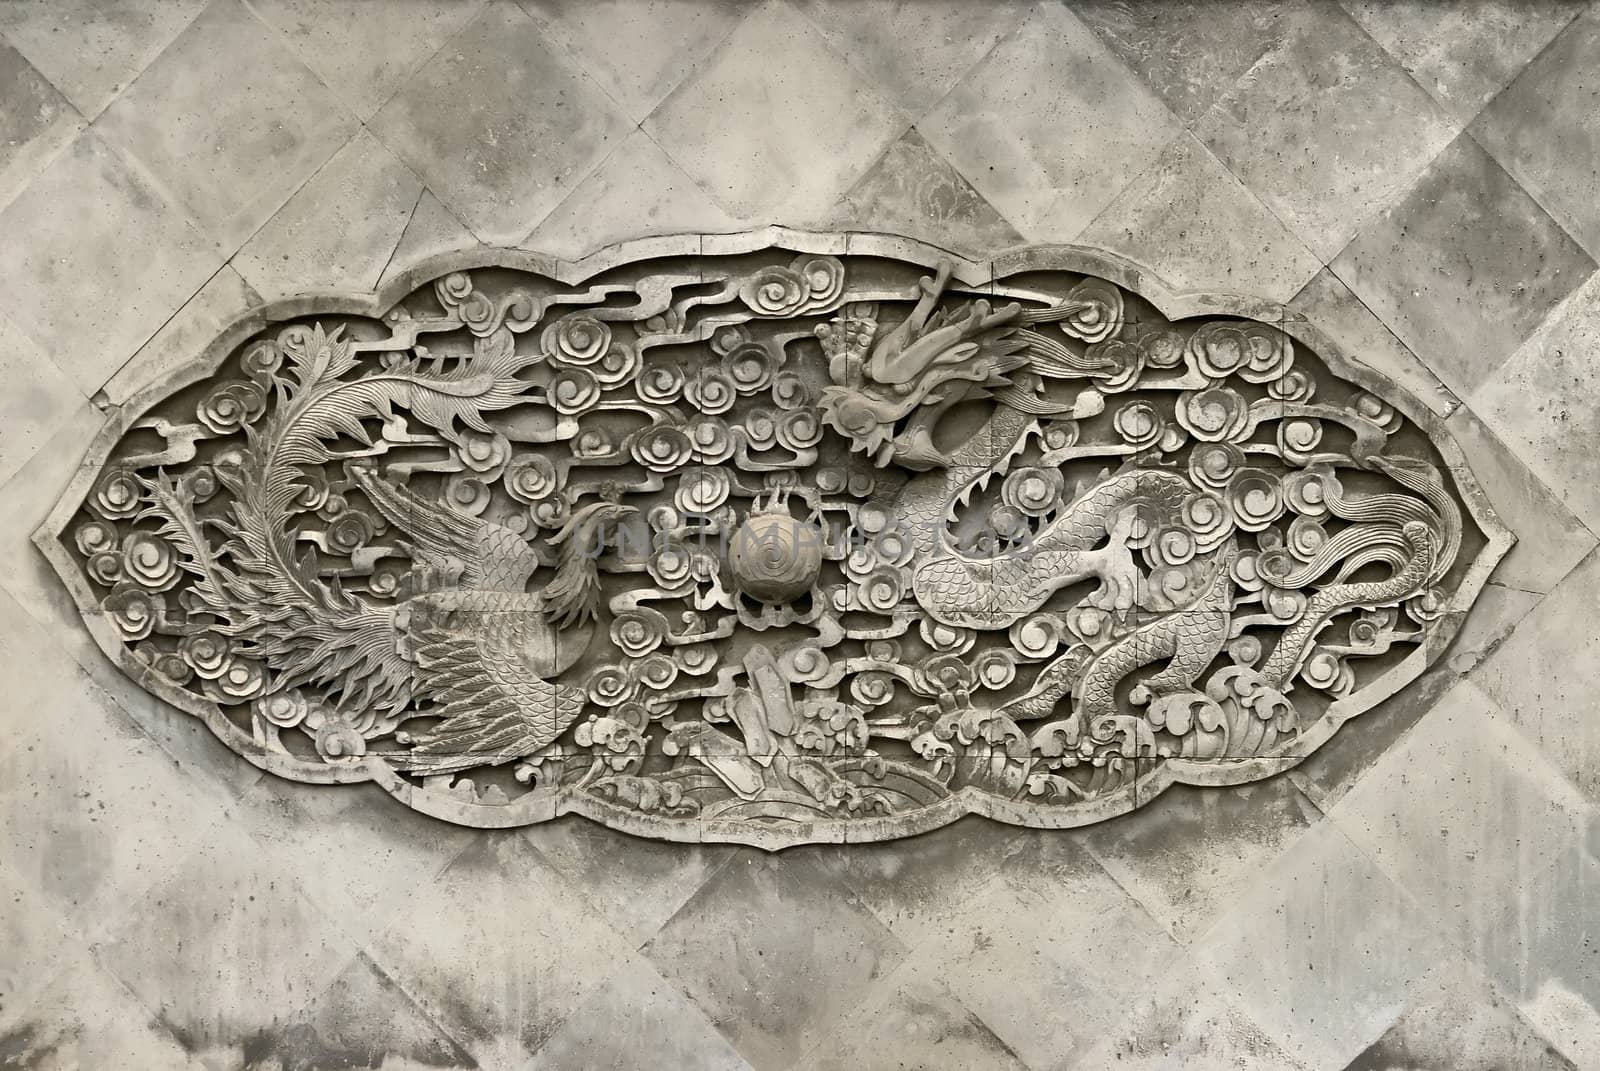 Stone relief element from the wall of Summer Royal palace in Beijing